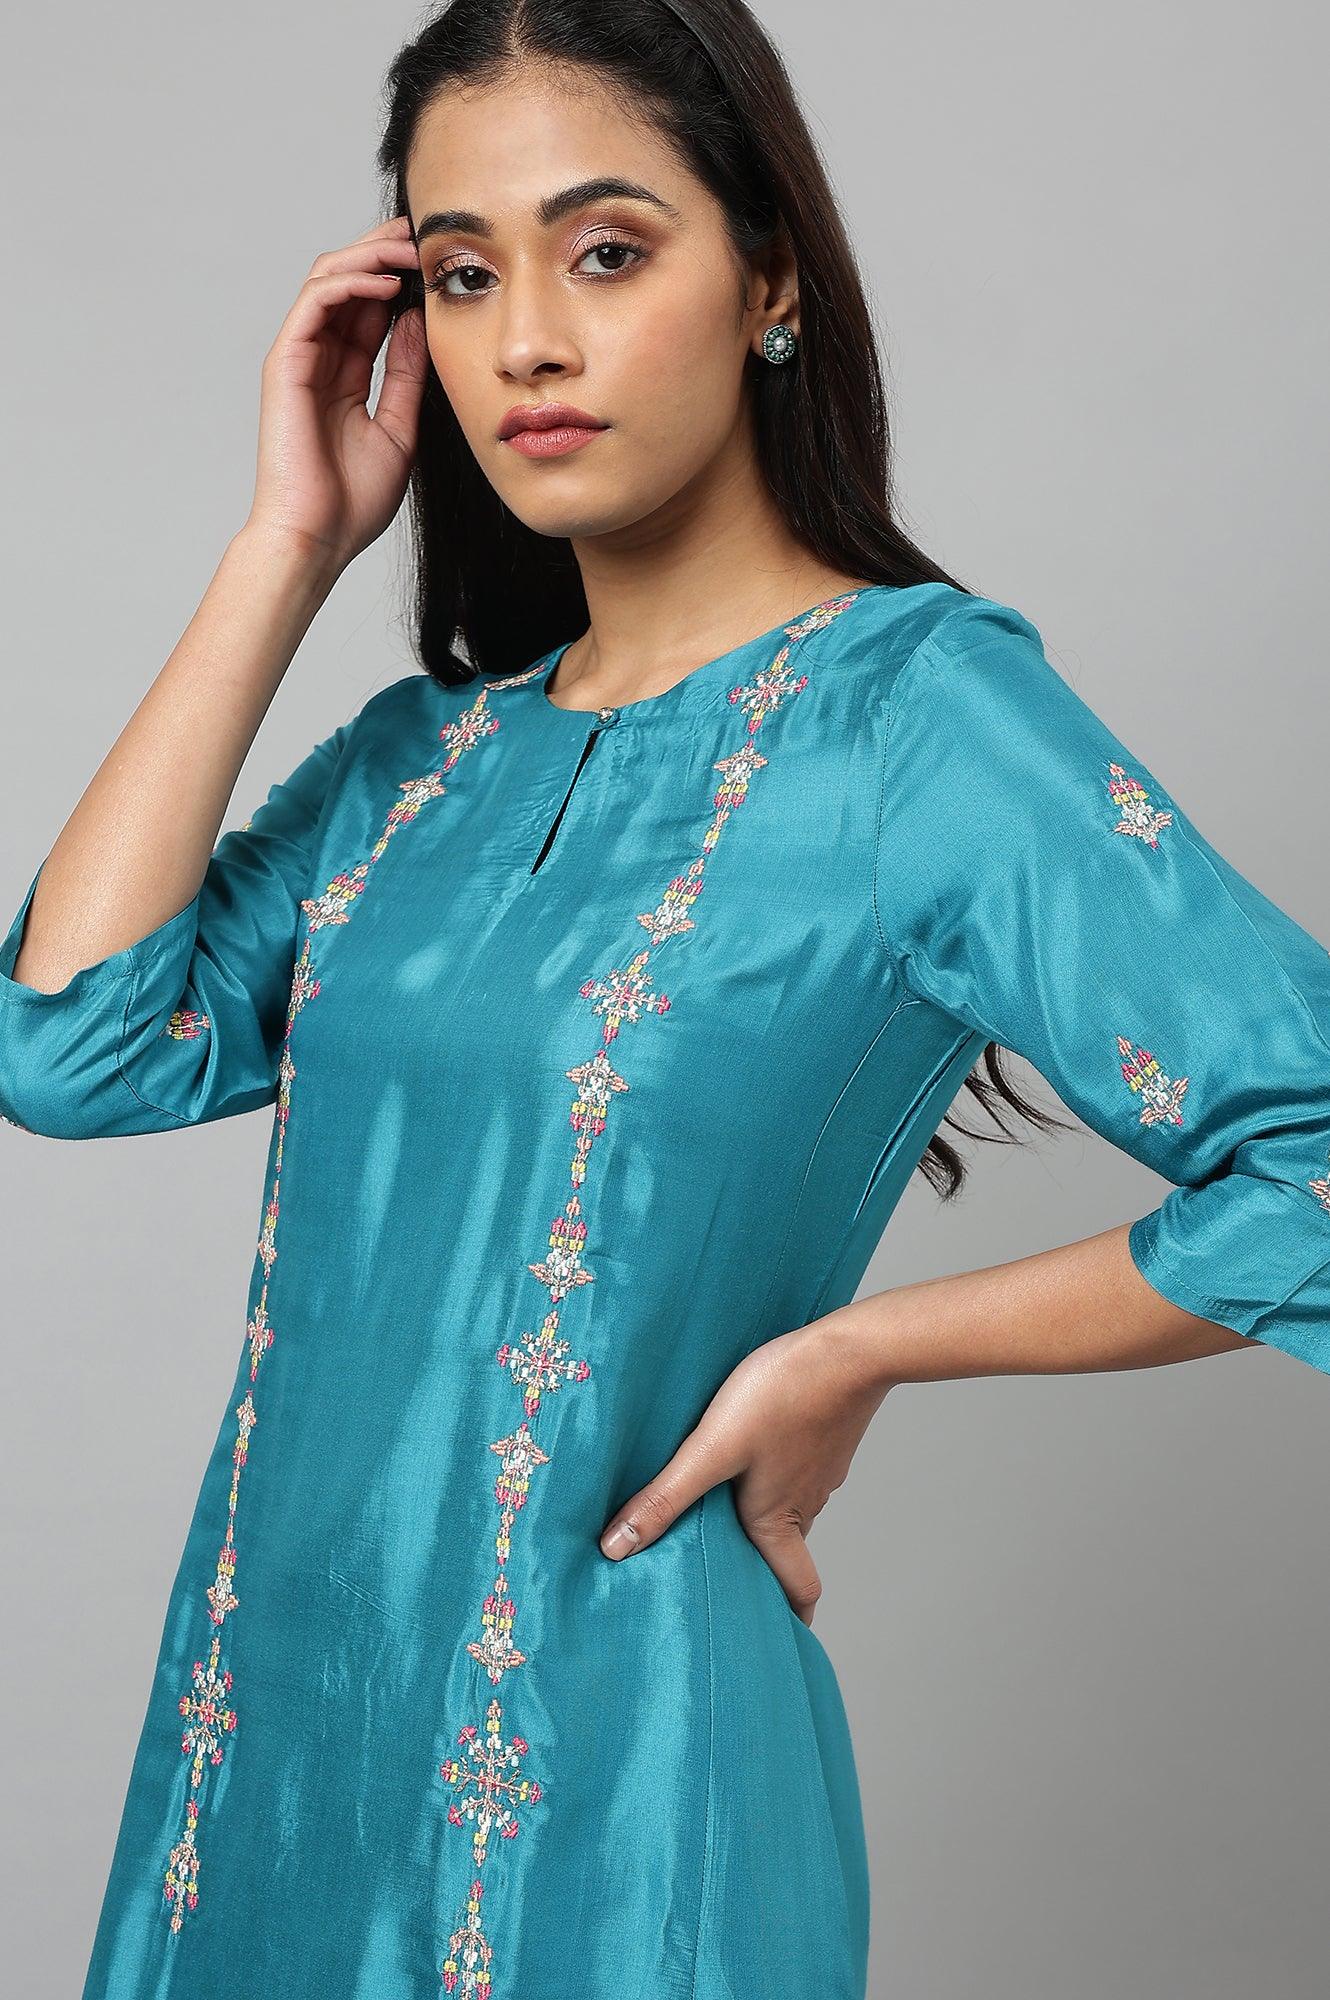 Teal Embroidered kurta With Front Slit - wforwoman